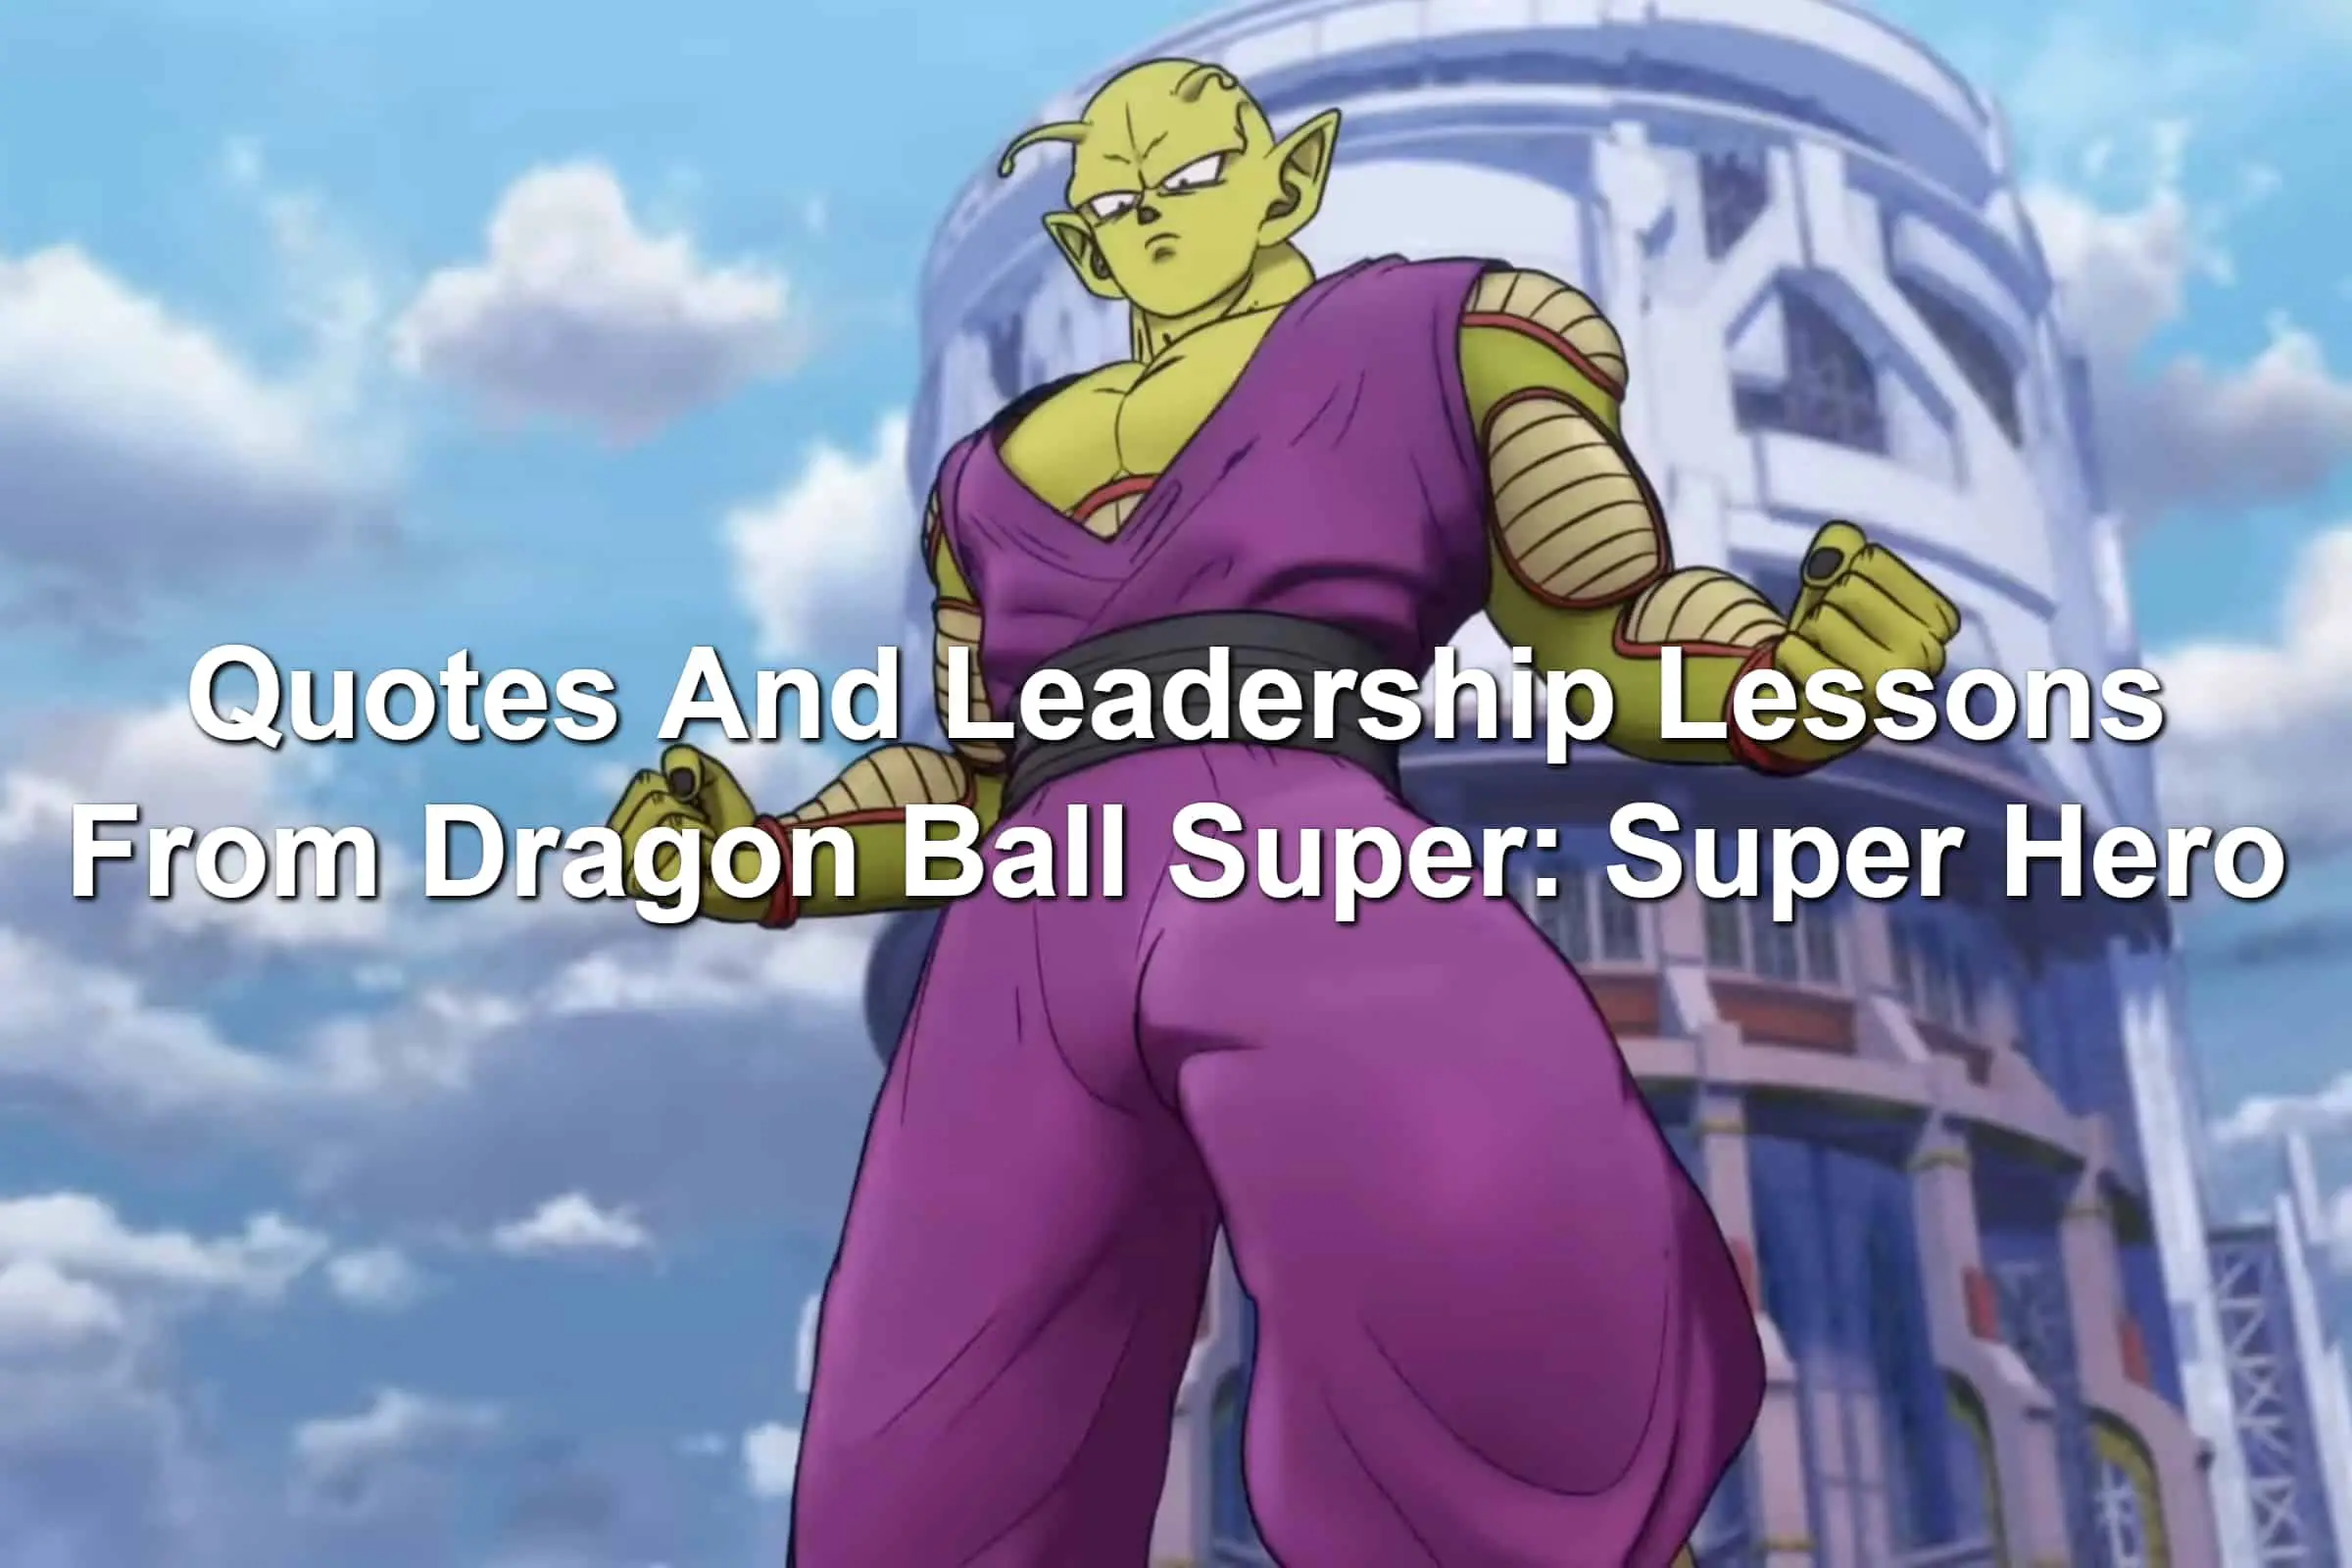 10 Fun Facts About Dragon Ball Z You Need To Know – I AM SUPERHERO